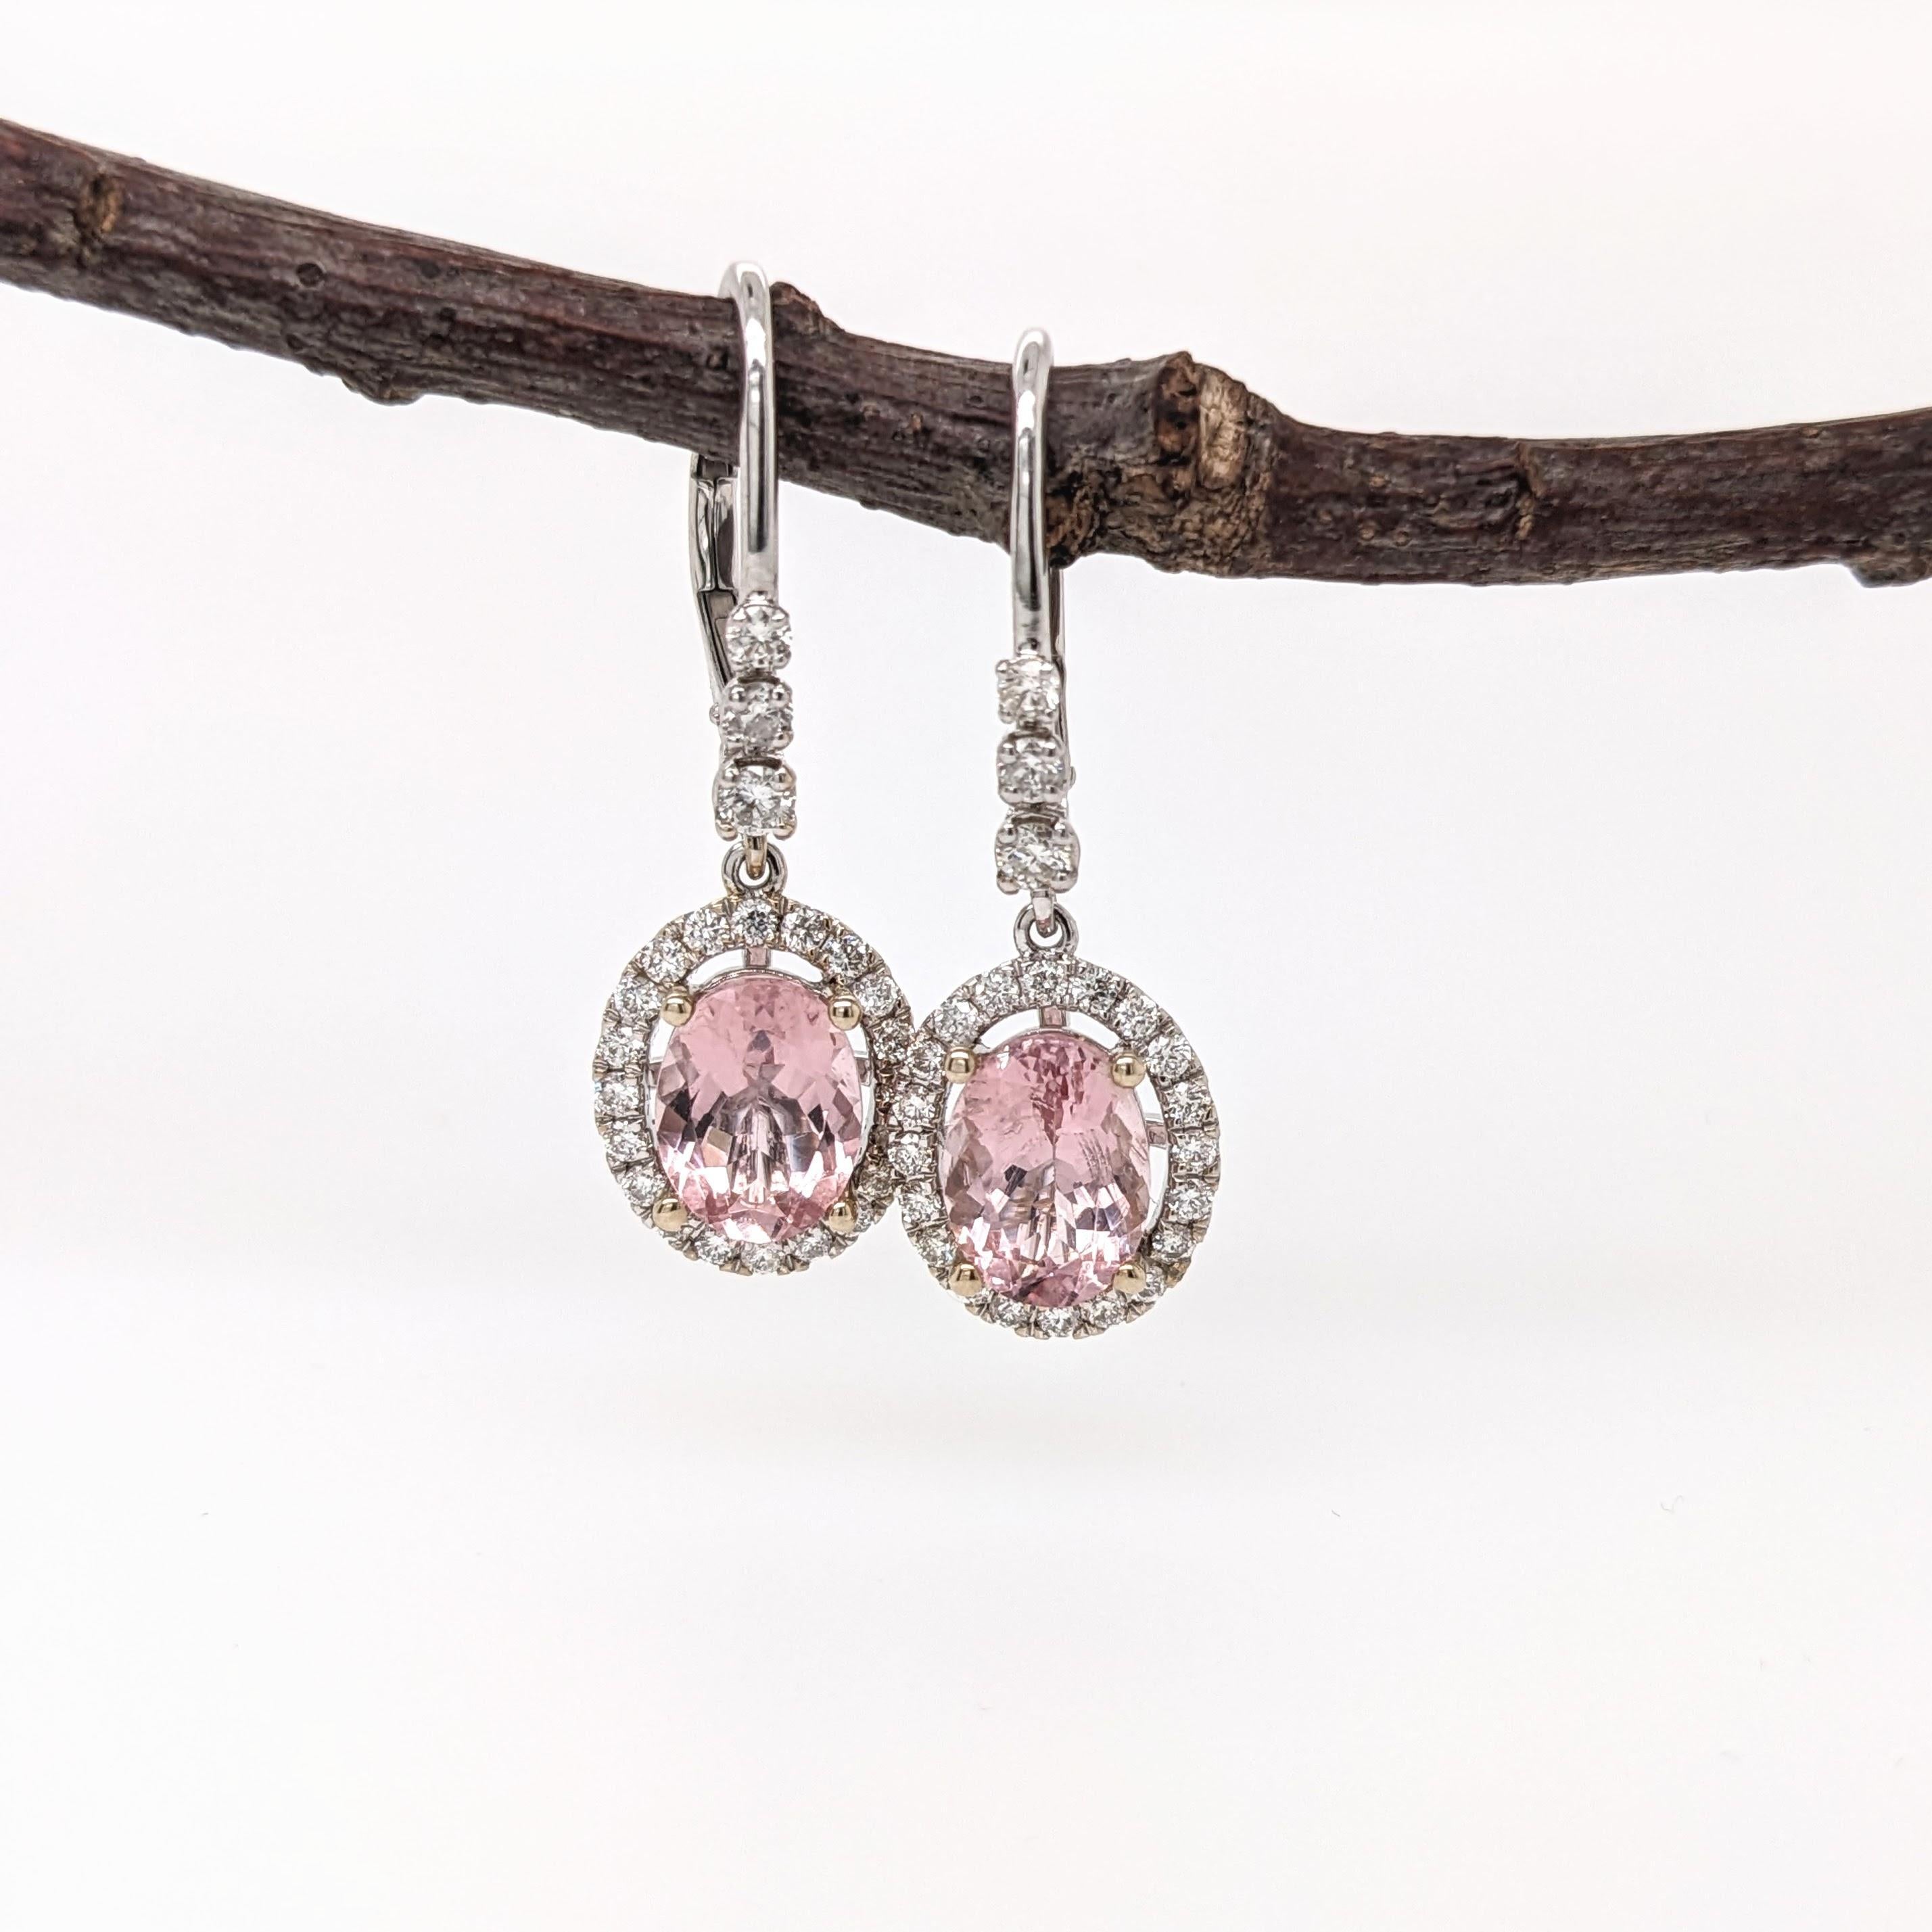 These beautiful drop earrings features two 2.52 cttw morganite oval gemstones with natural earth mined diamonds all set in solid 14k gold. A stunning pair of drop earrings which also make a beautiful June birthstone gift for your loved